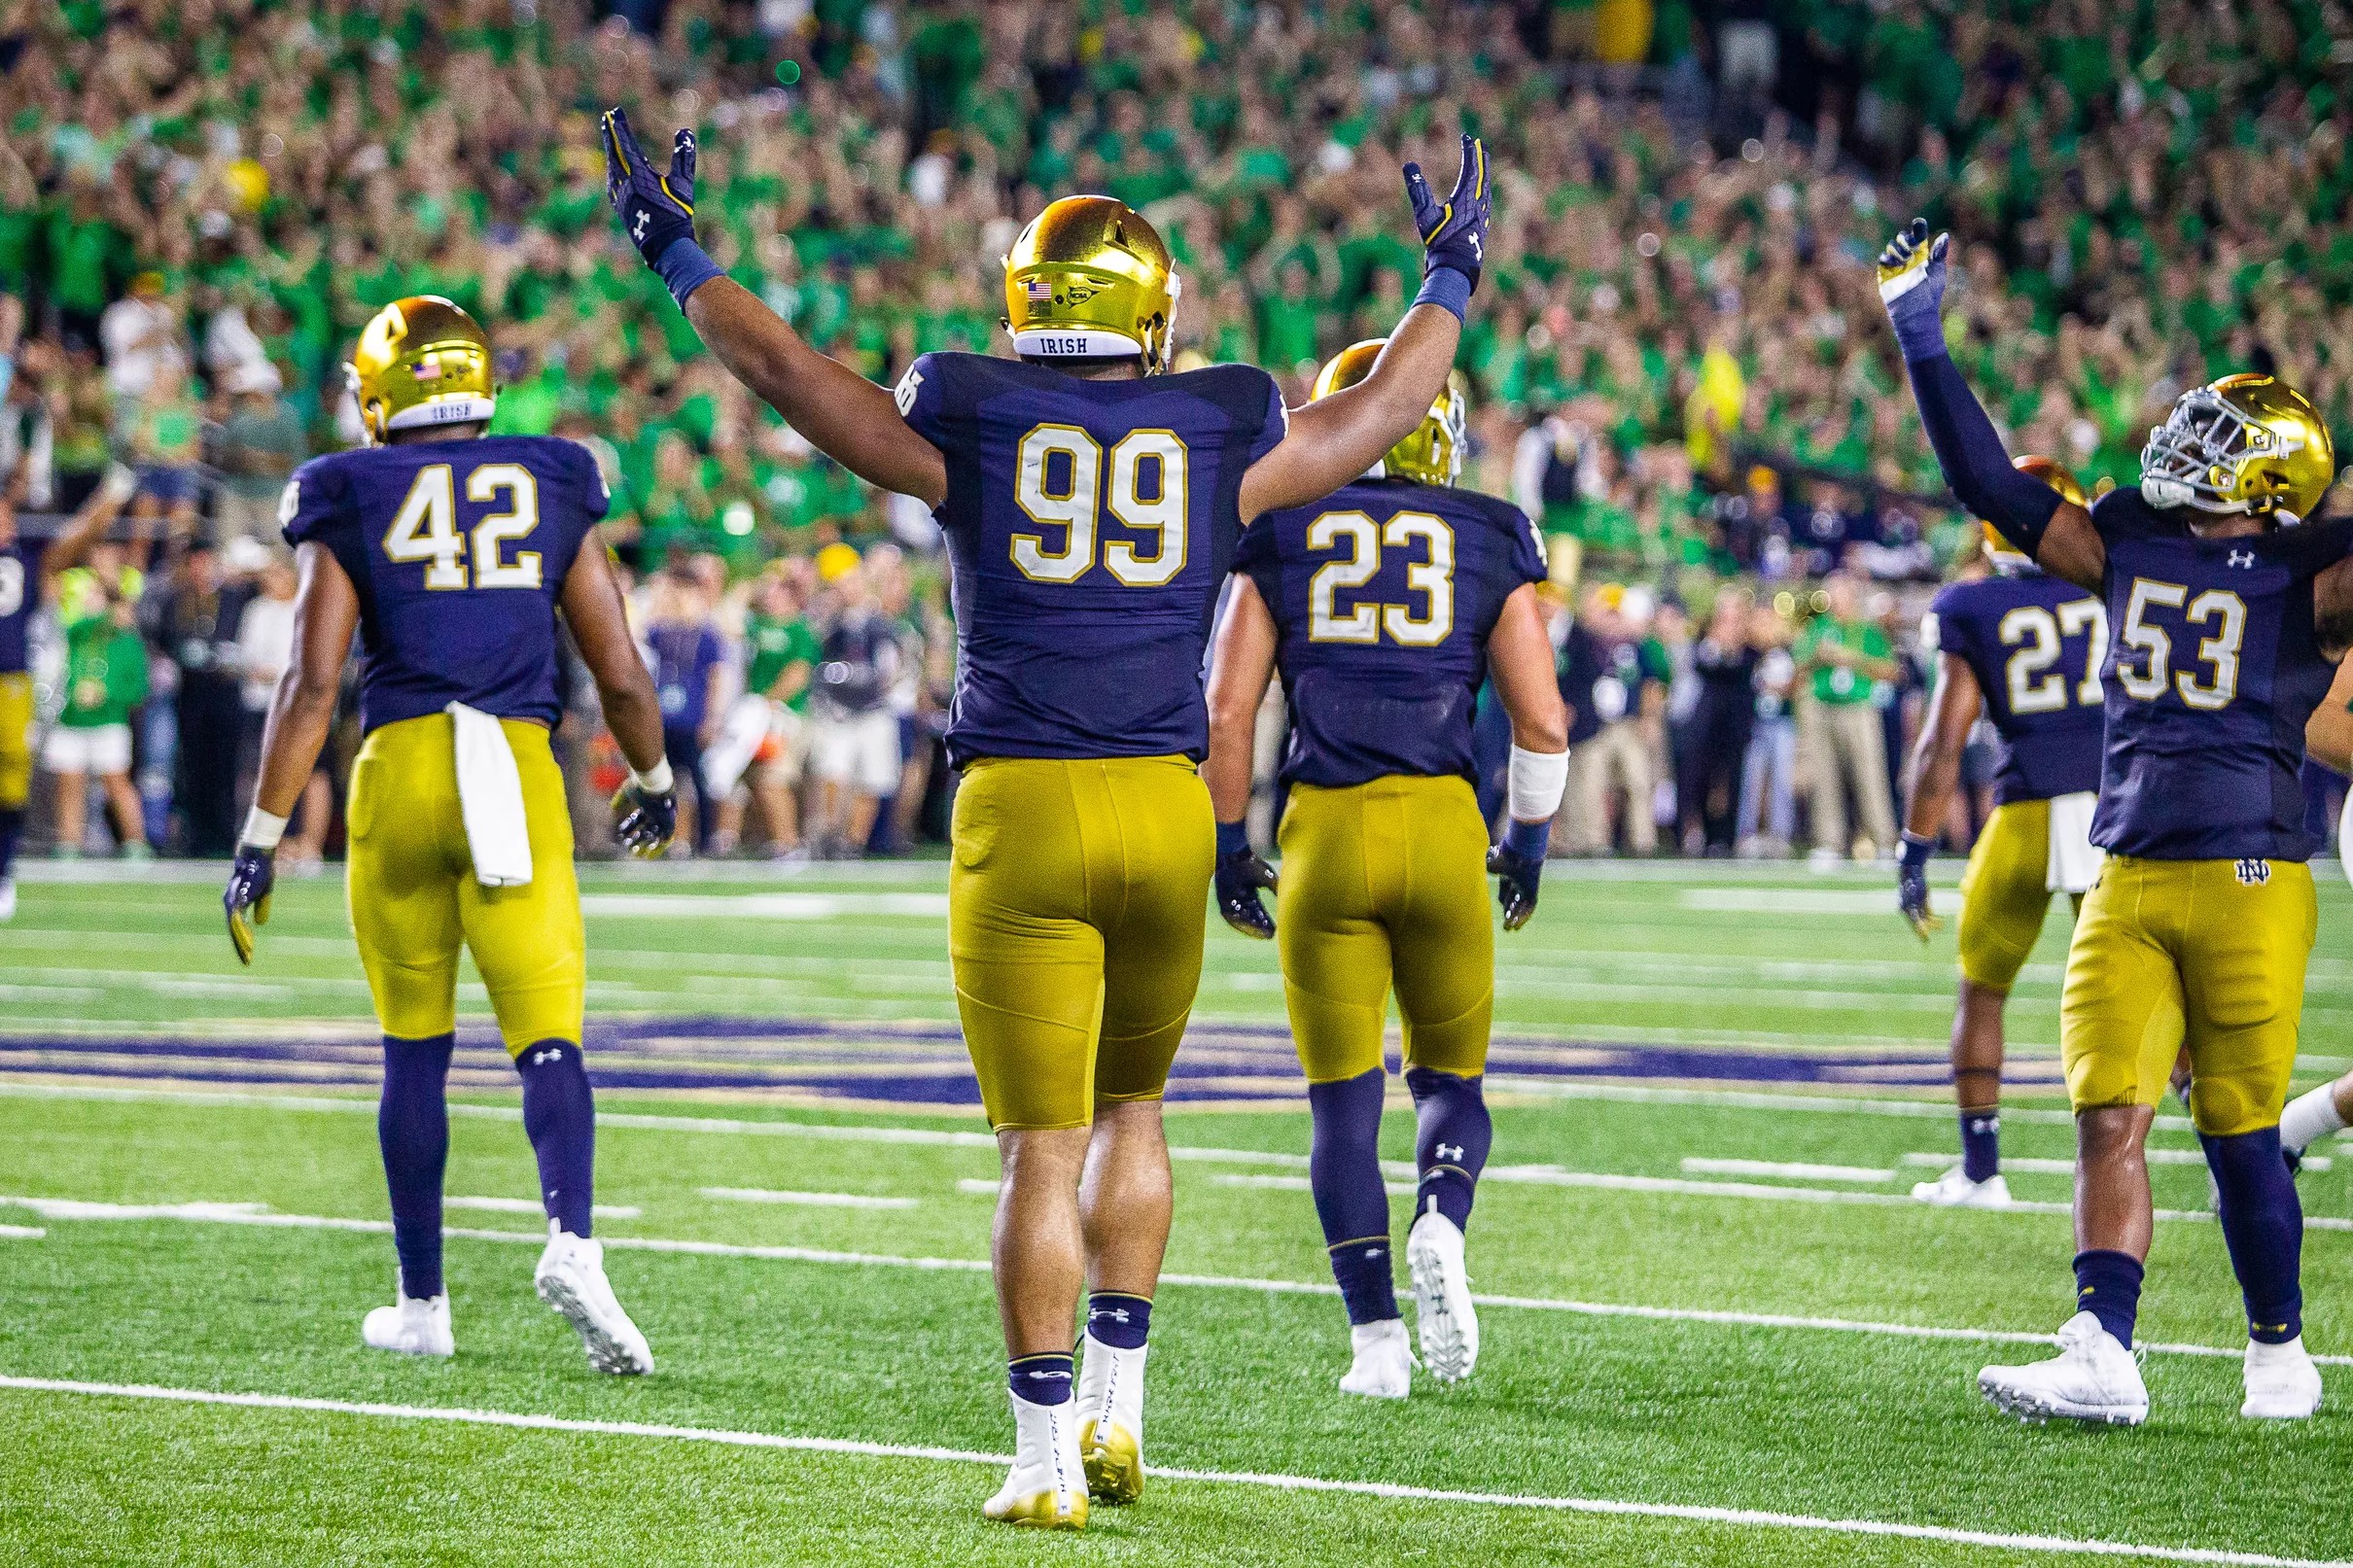 Notre Dame Football Needs A Schedule Change To Strengthen Its Independence